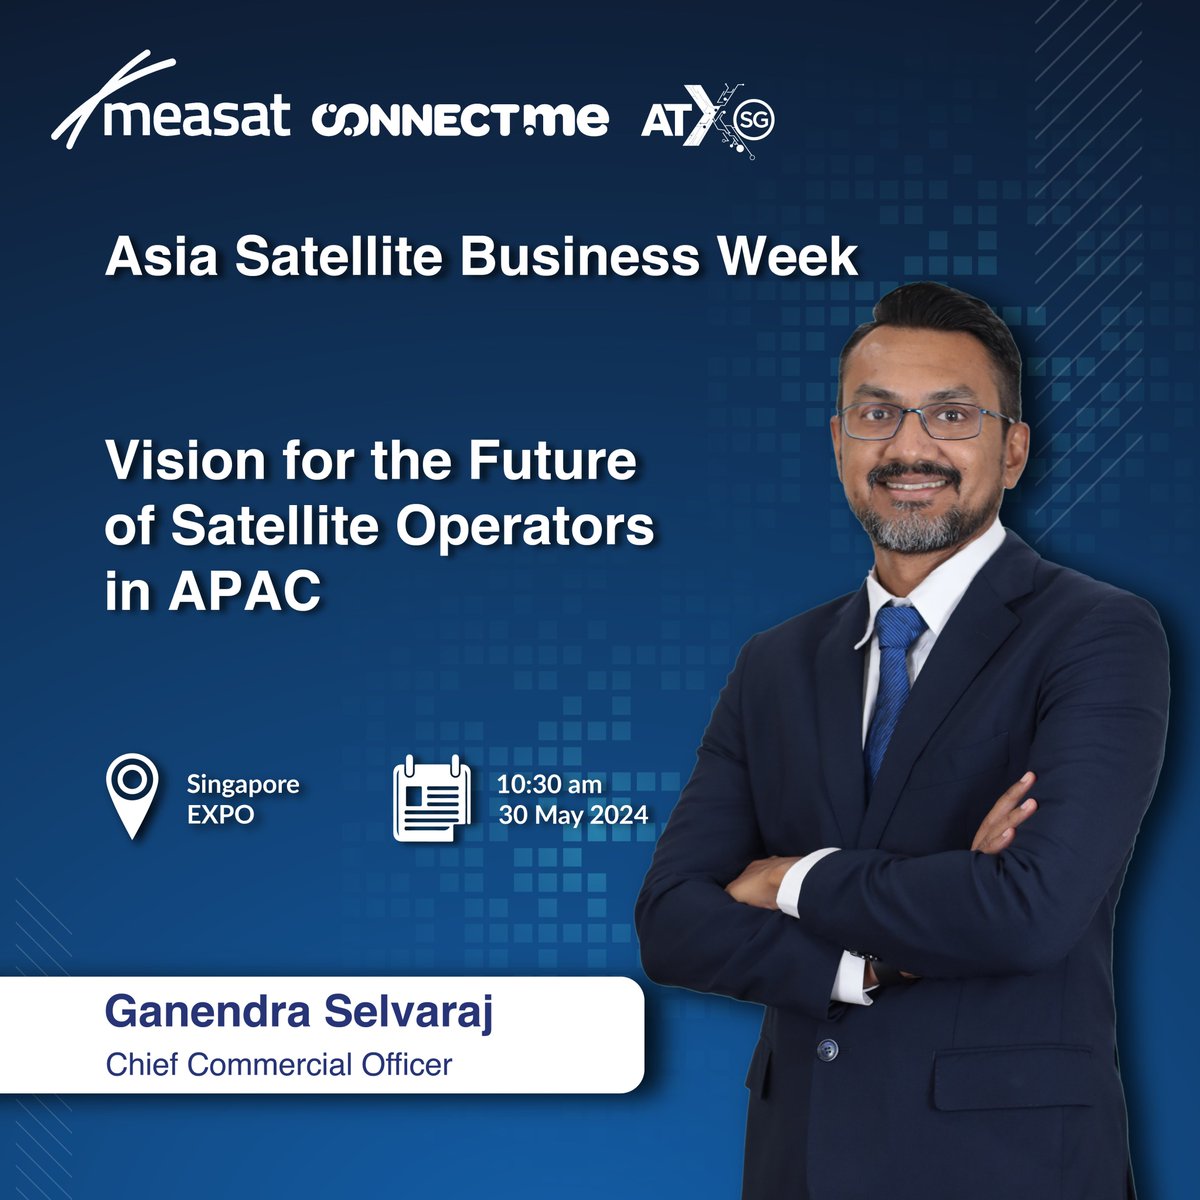 Catch Ganendra Selvaraj, MEASAT's CCO, at Asia Satellite Business Week’s 'Vision for the Future of Satellite Operators in APAC Meet our Sales team at Asia Tech x Singapore and schedule a meeting: measat.com/atxsg-2024/ #MEASAT #CONNECTme #CONNECTmeNOW #ATXSG #Singapore